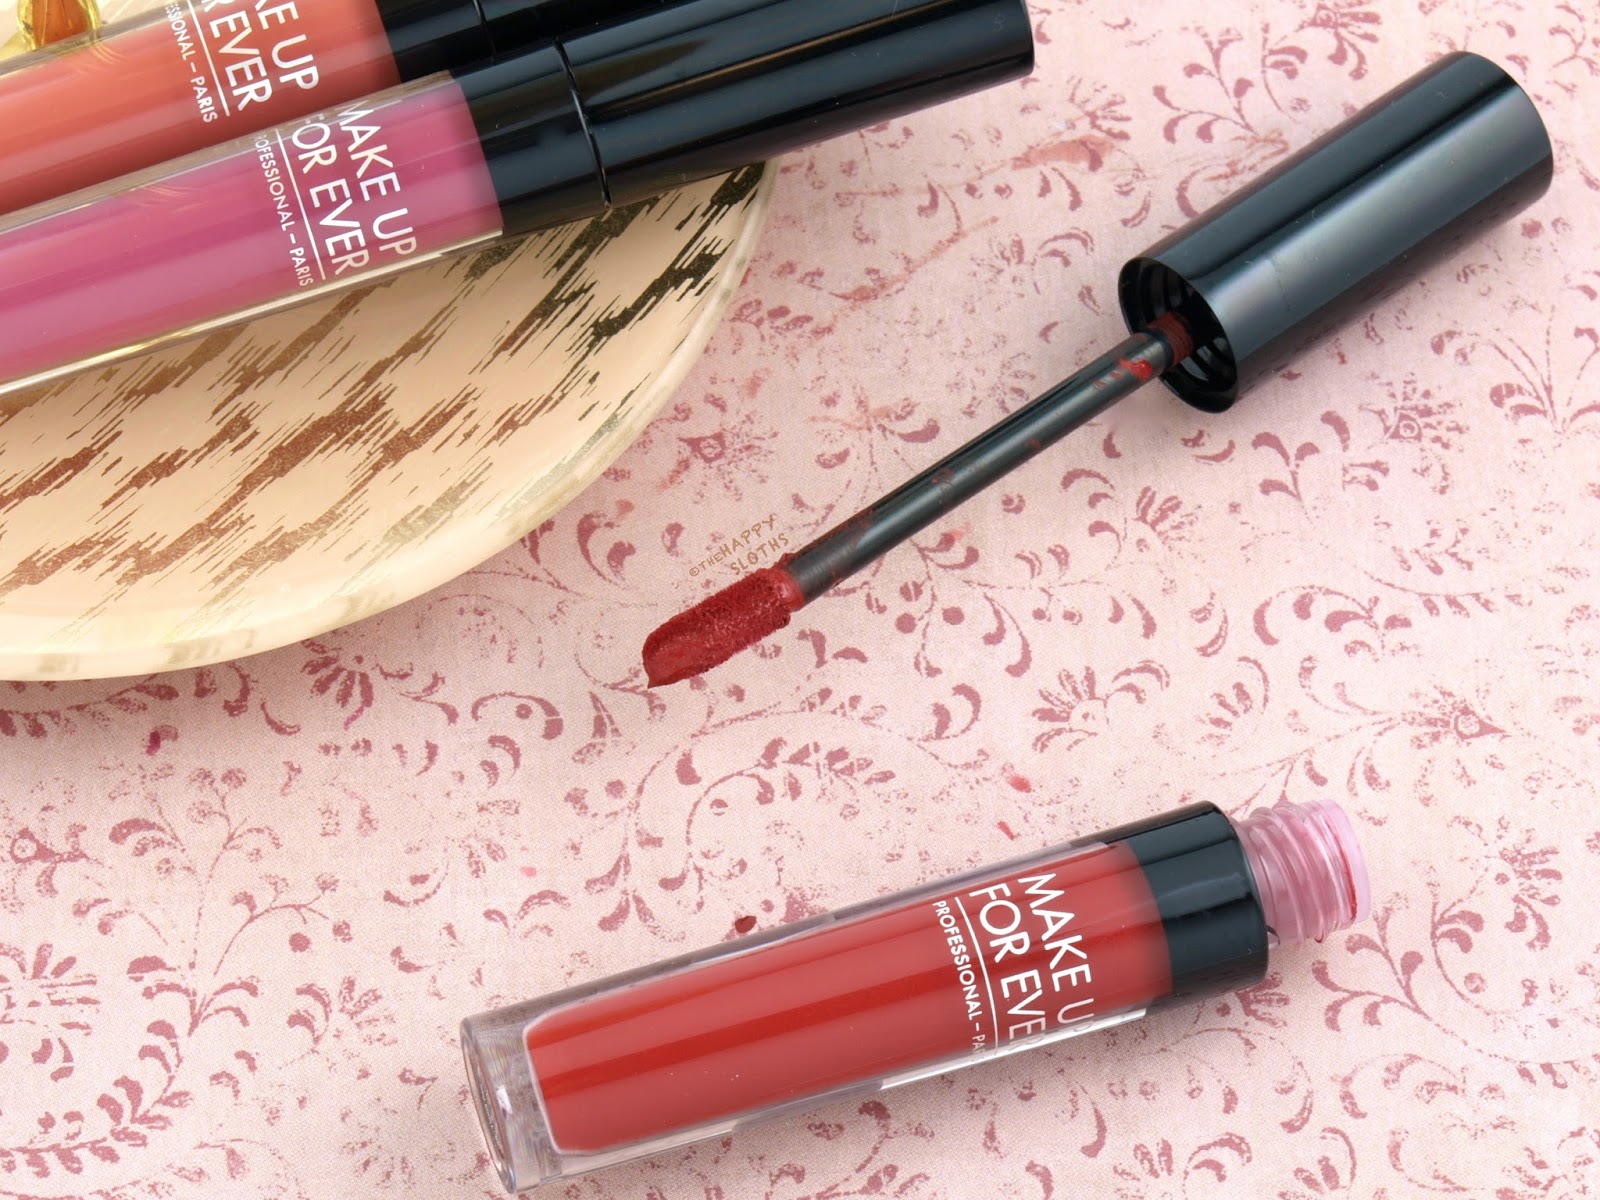 Make Up For Ever Artist Liquid Matte | 205 Mauvy Pink, 301 Rust & 403 Deep Red: Review and Swatches